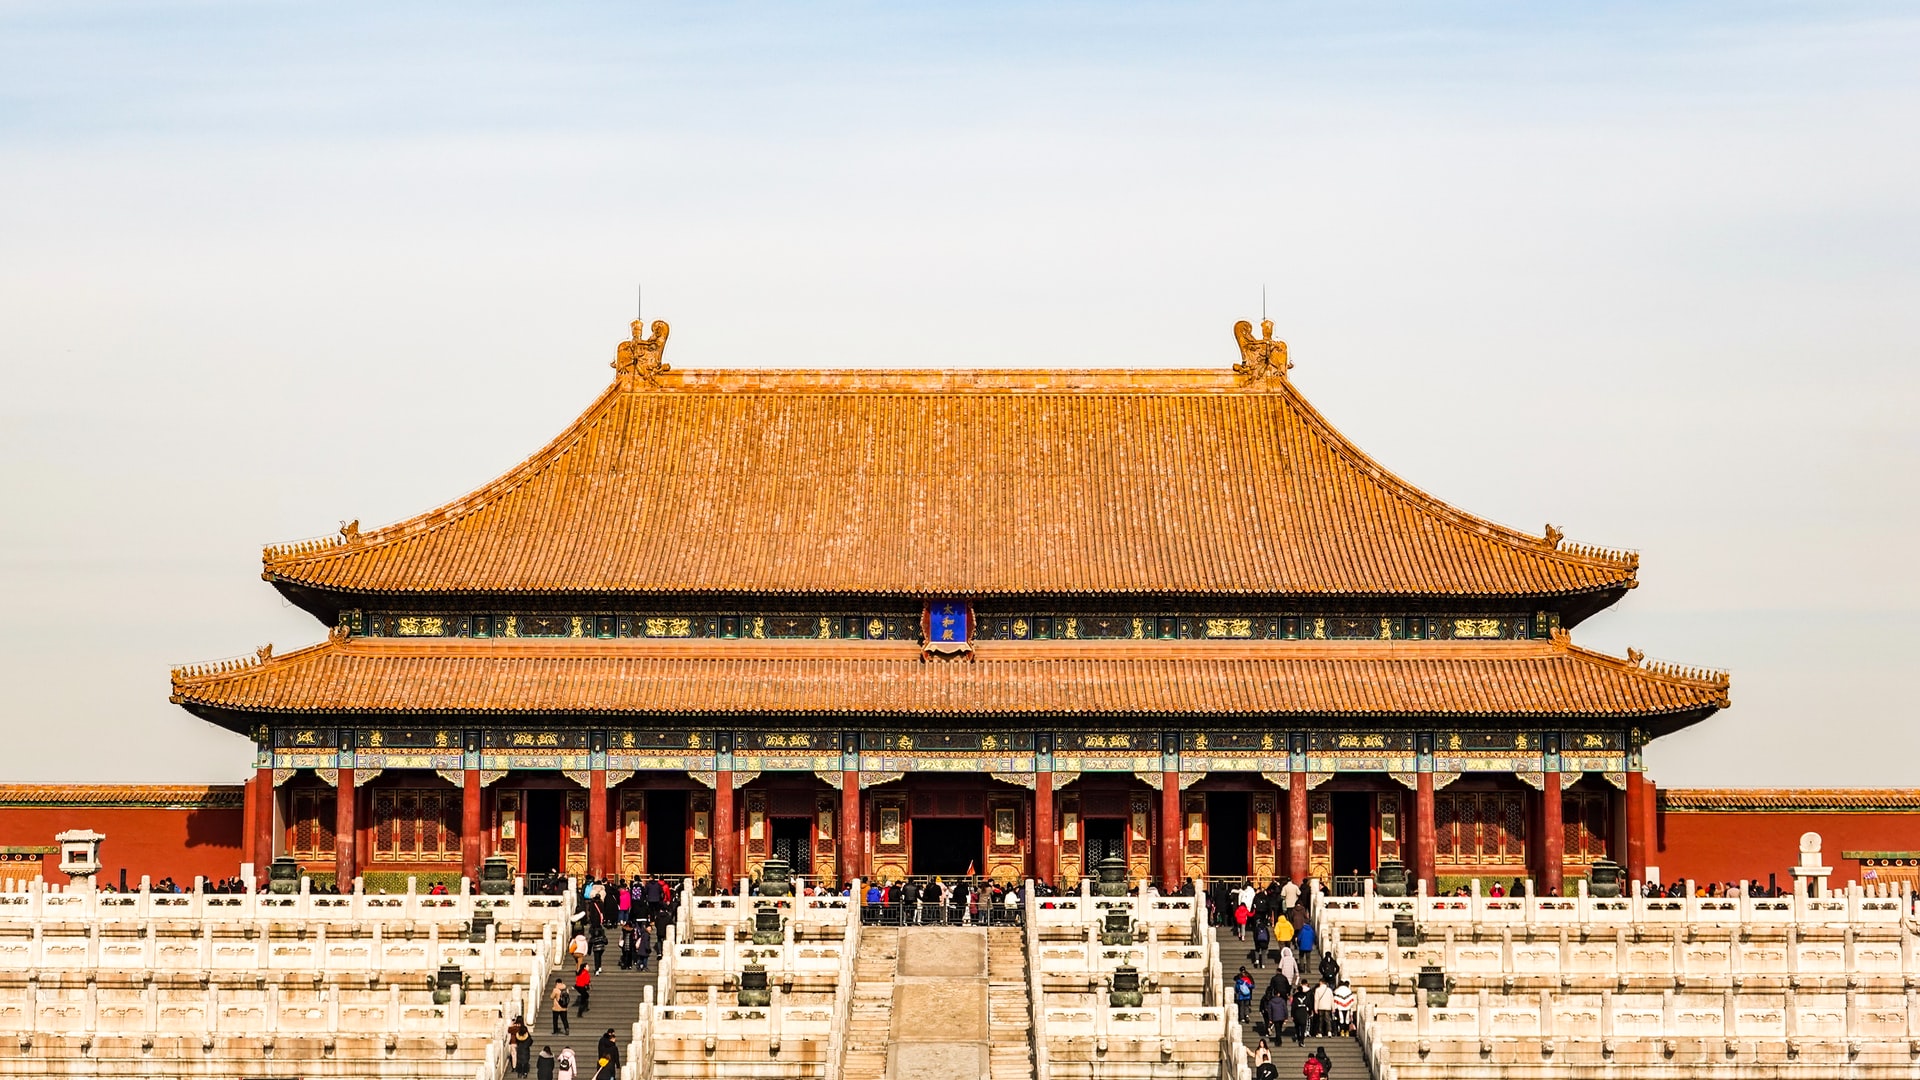 Beijing's Forbidden City - What to see and do on a Beijing layover